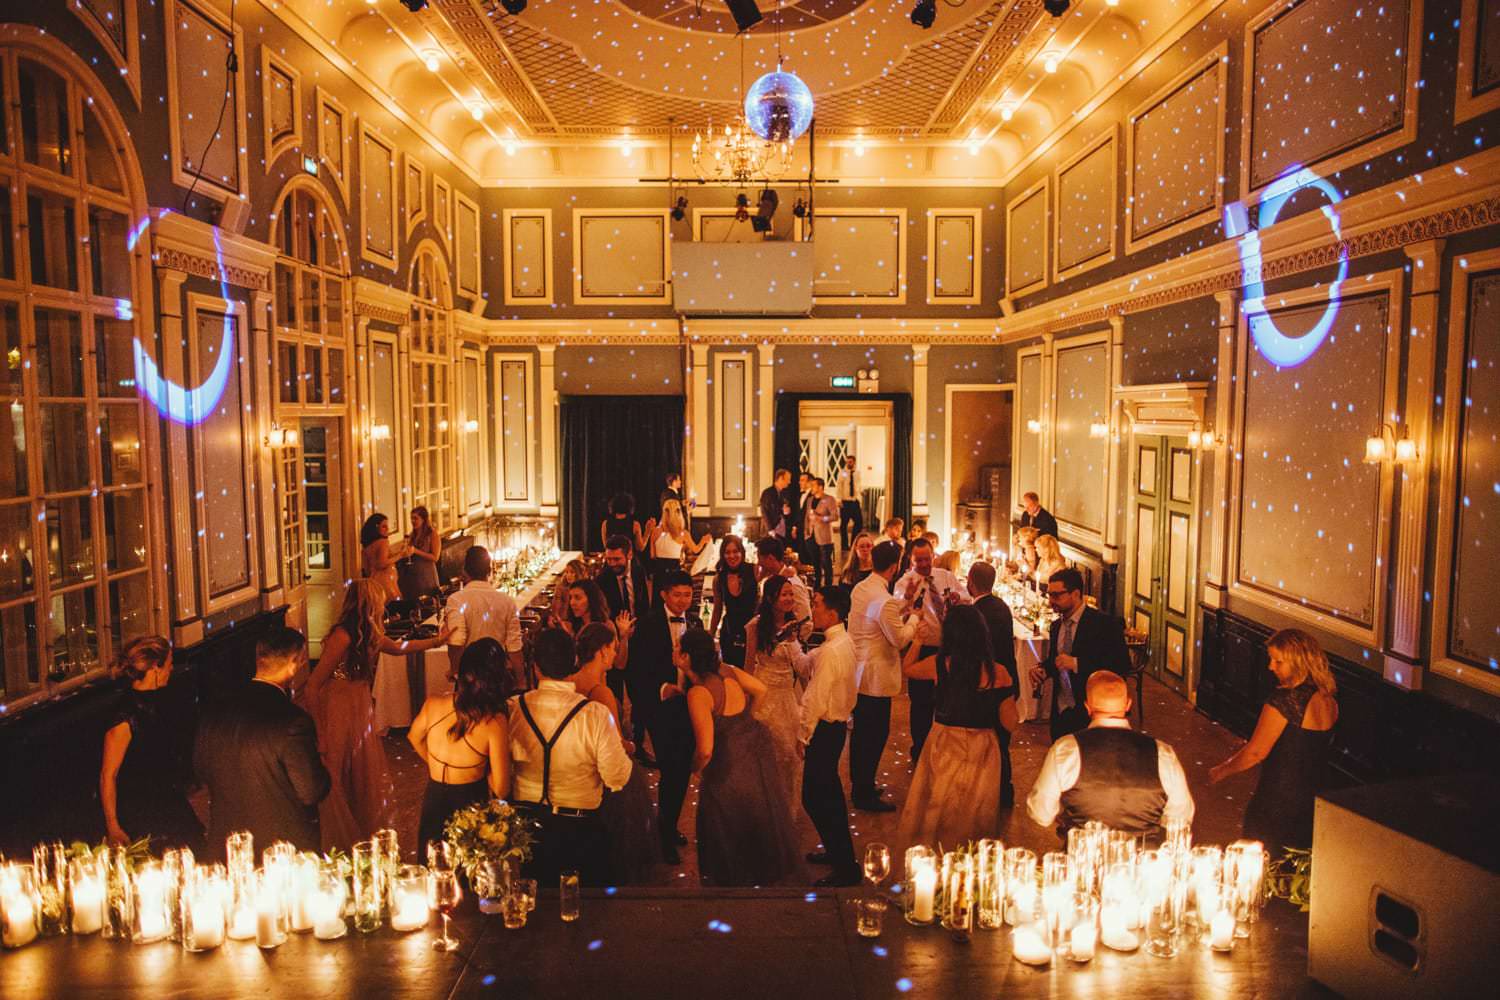 Wedding guests celebrate at a wedding reception in Idno Theatre, one of the most popular wedding venues in Iceland.